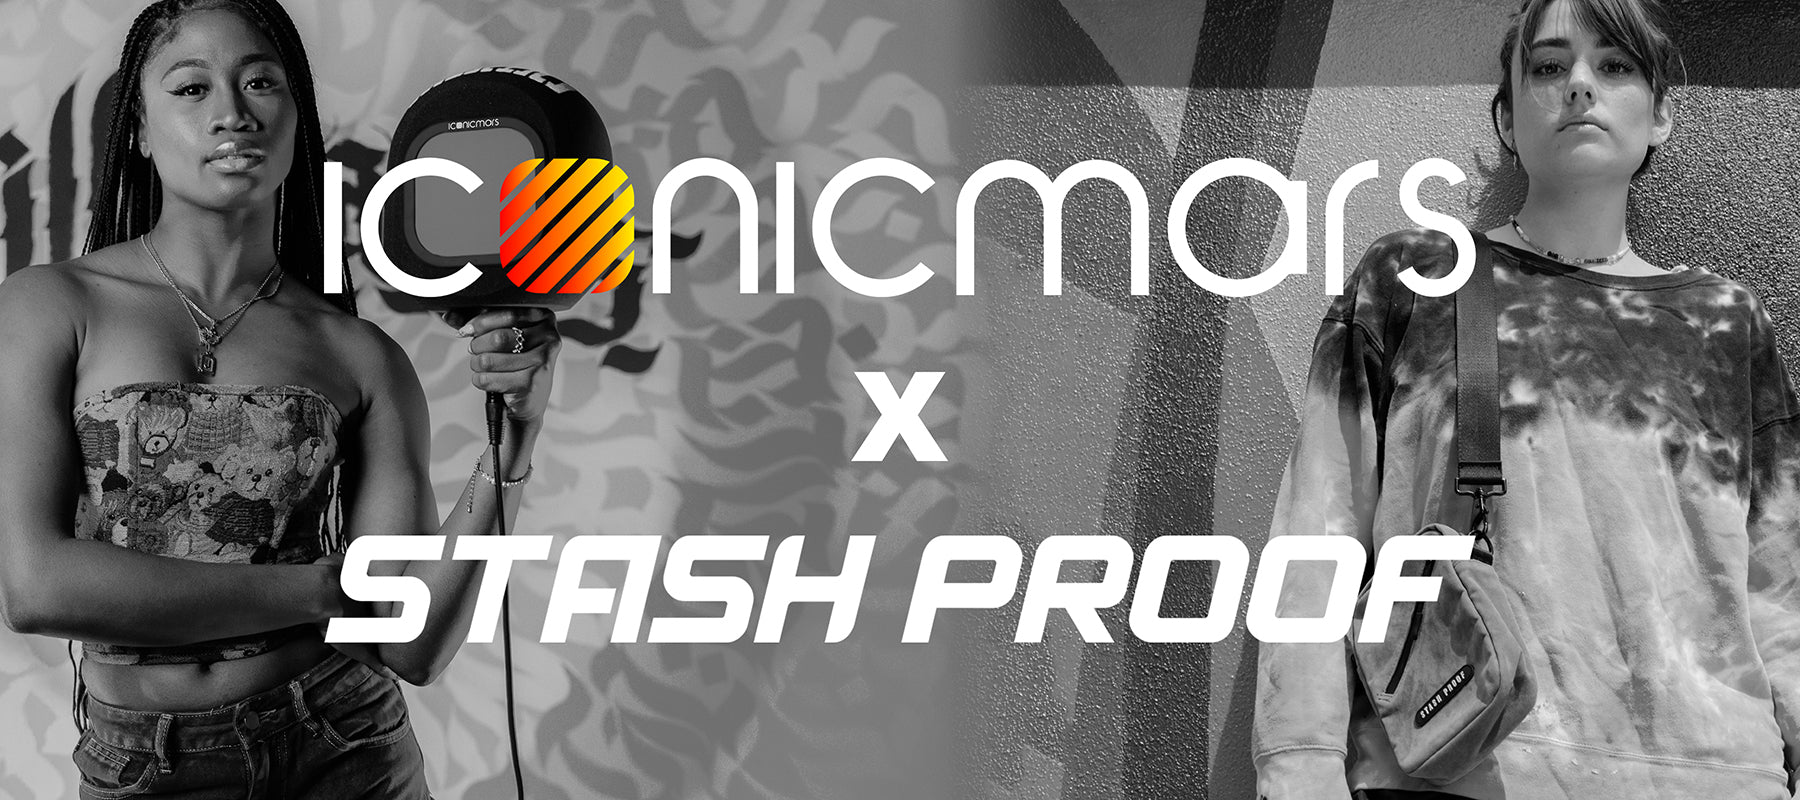 Iconic Mars x Stash Proof collaboration for apparel and t shirt and clothing line